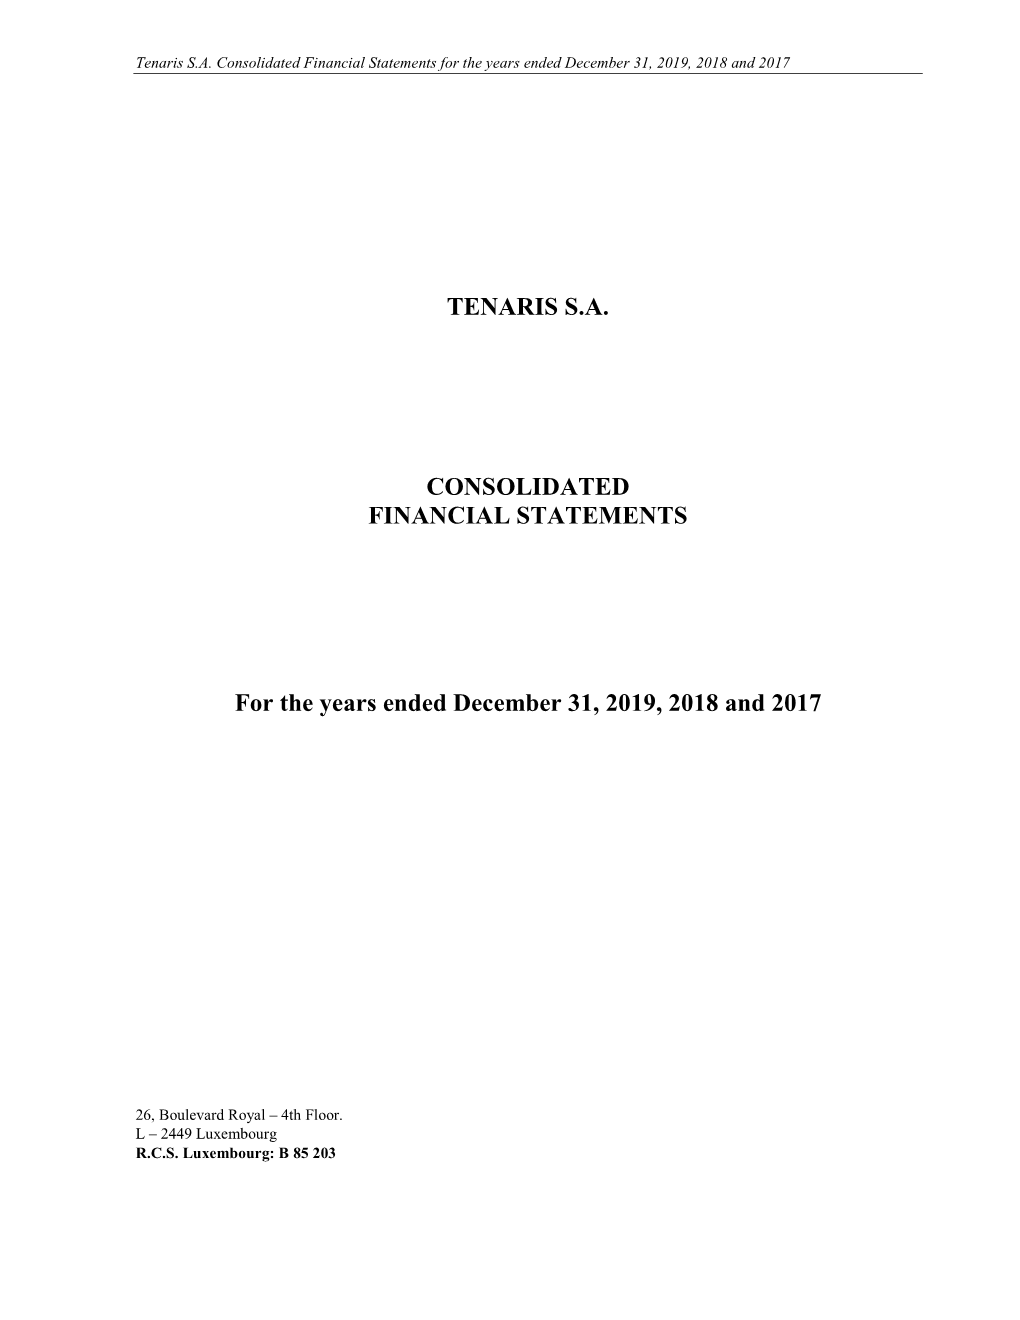 Tenaris S.A. Consolidated Financial Statements for the Years Ended December 31, 2019, 2018 and 2017